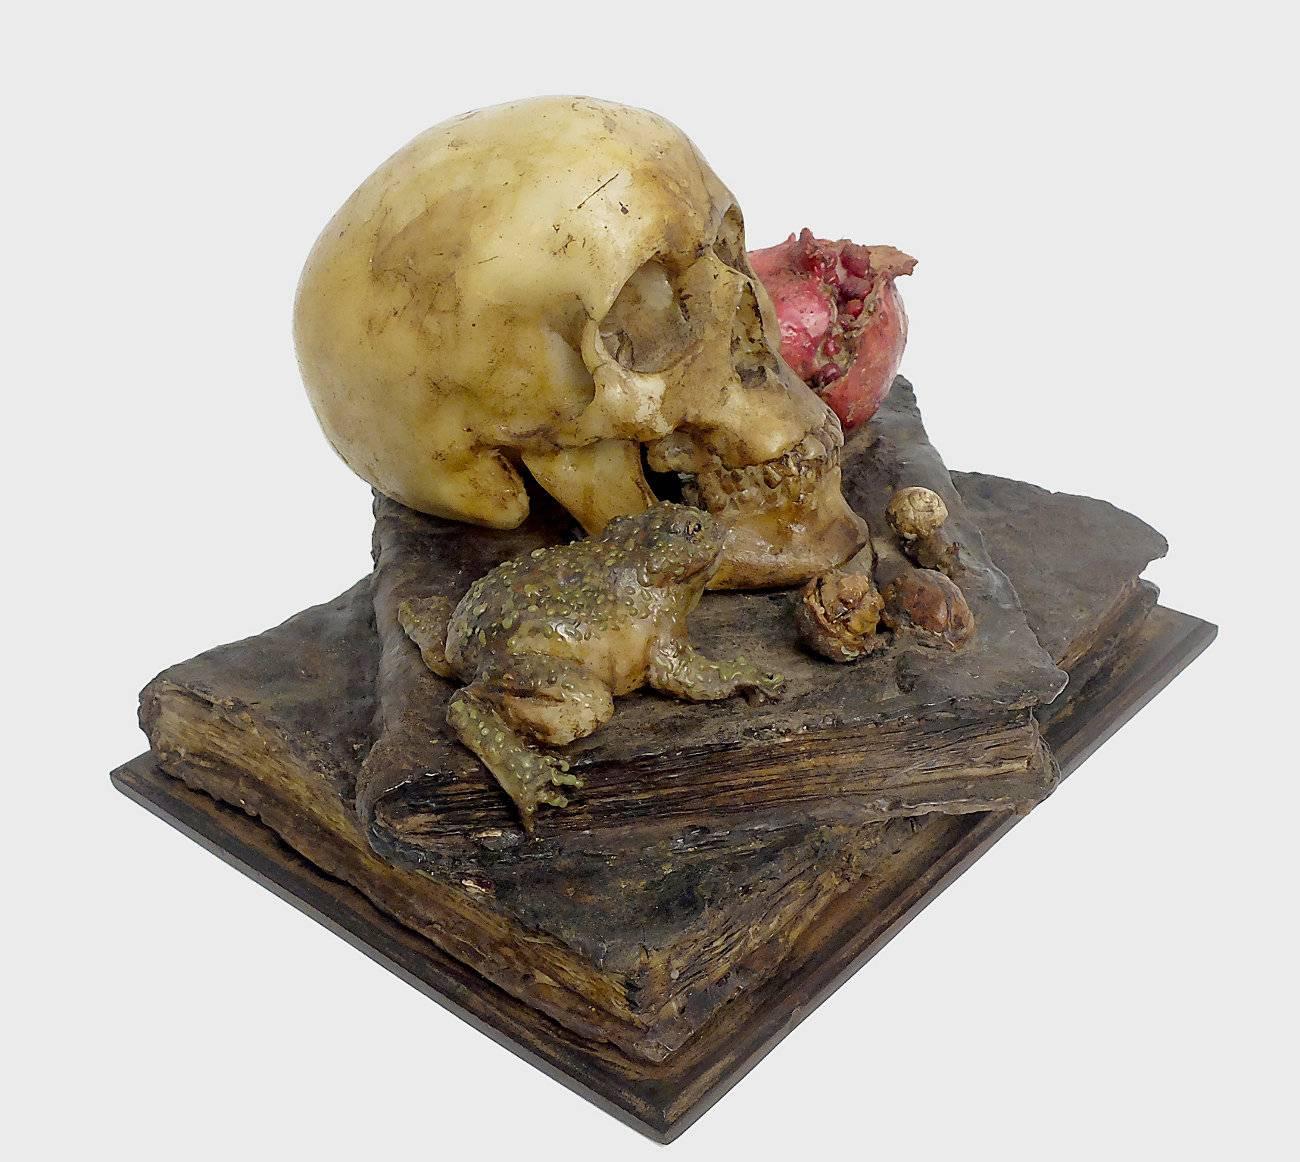 An important and rare Italian Wunderkammer Memento Mori sculpture, depicting a skull , a pomegranate, a toad, a snail ,a nut and two combusted books. The entire sculpture is made out of colored wax and placed over a black wooden board. Inside the